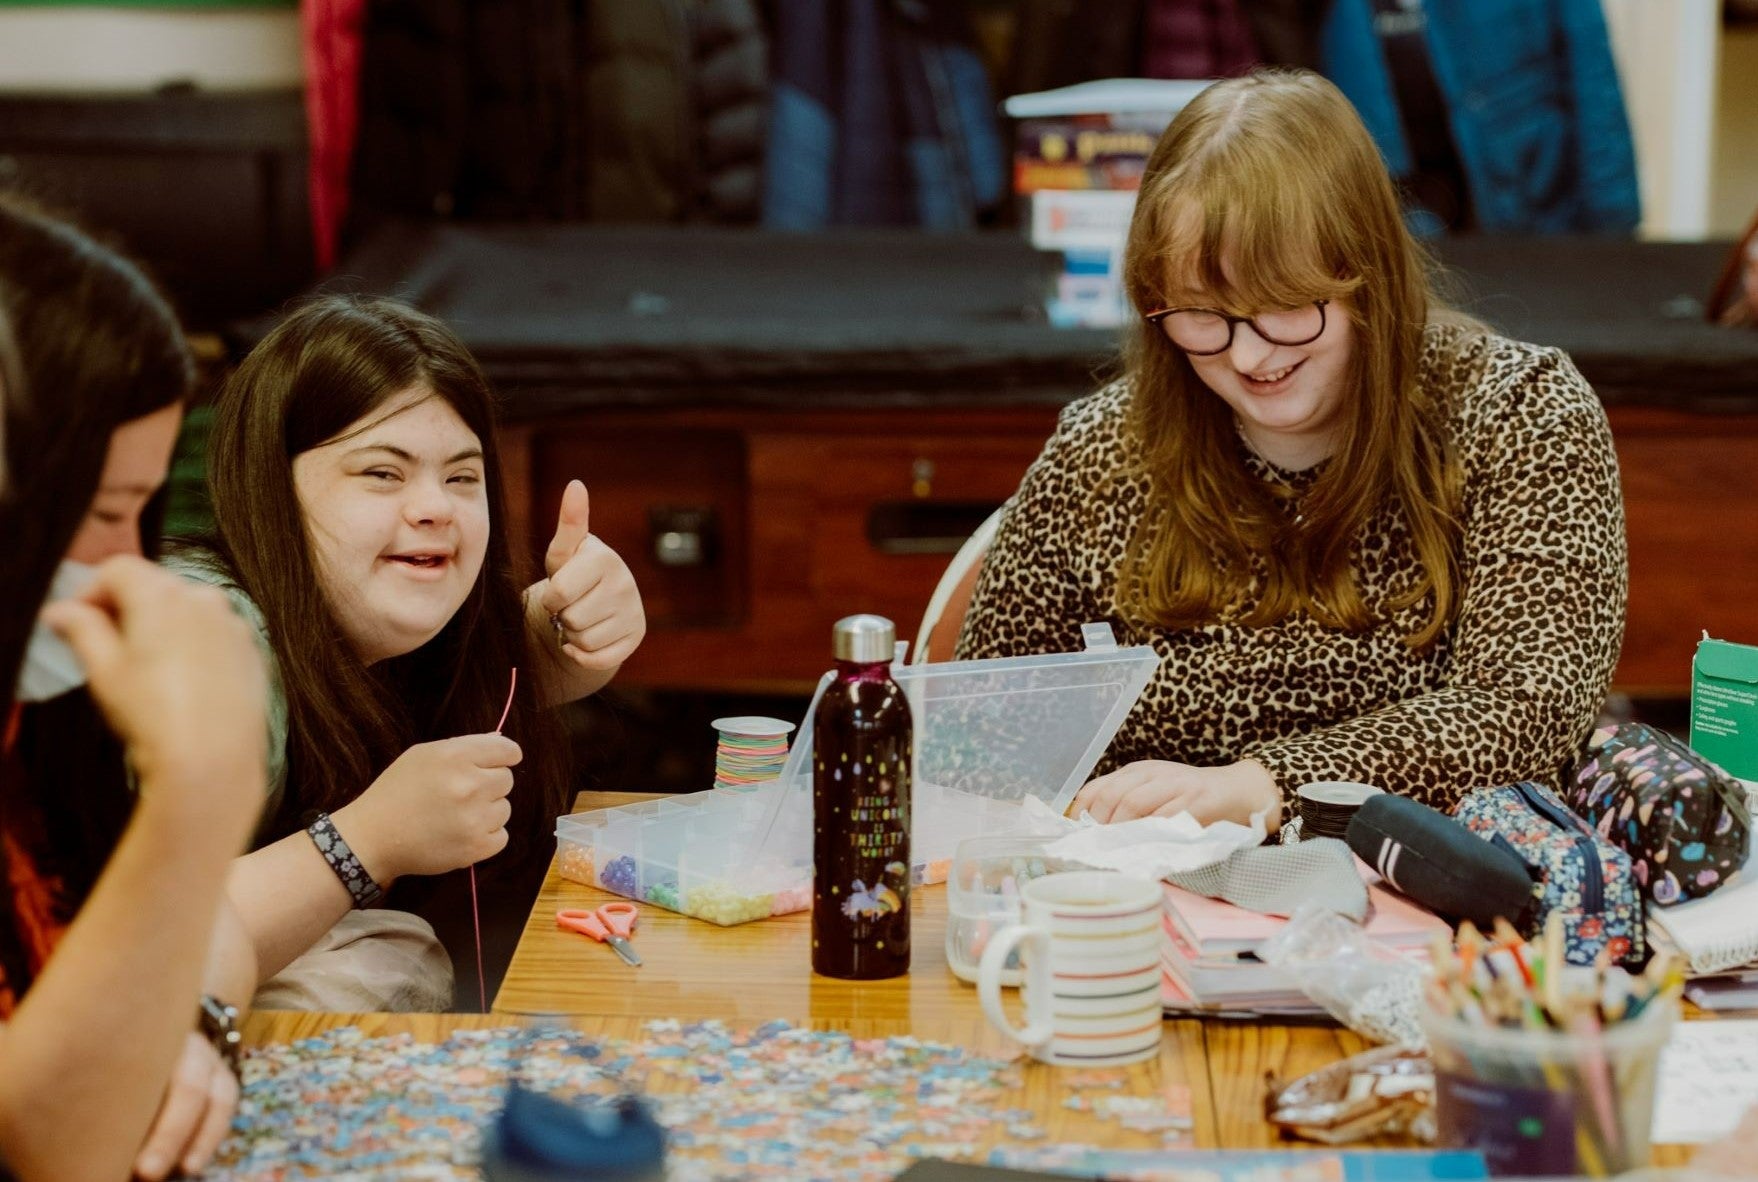 Two women doing artwork at a table. One woman has her thumbs up to the camera and smiling